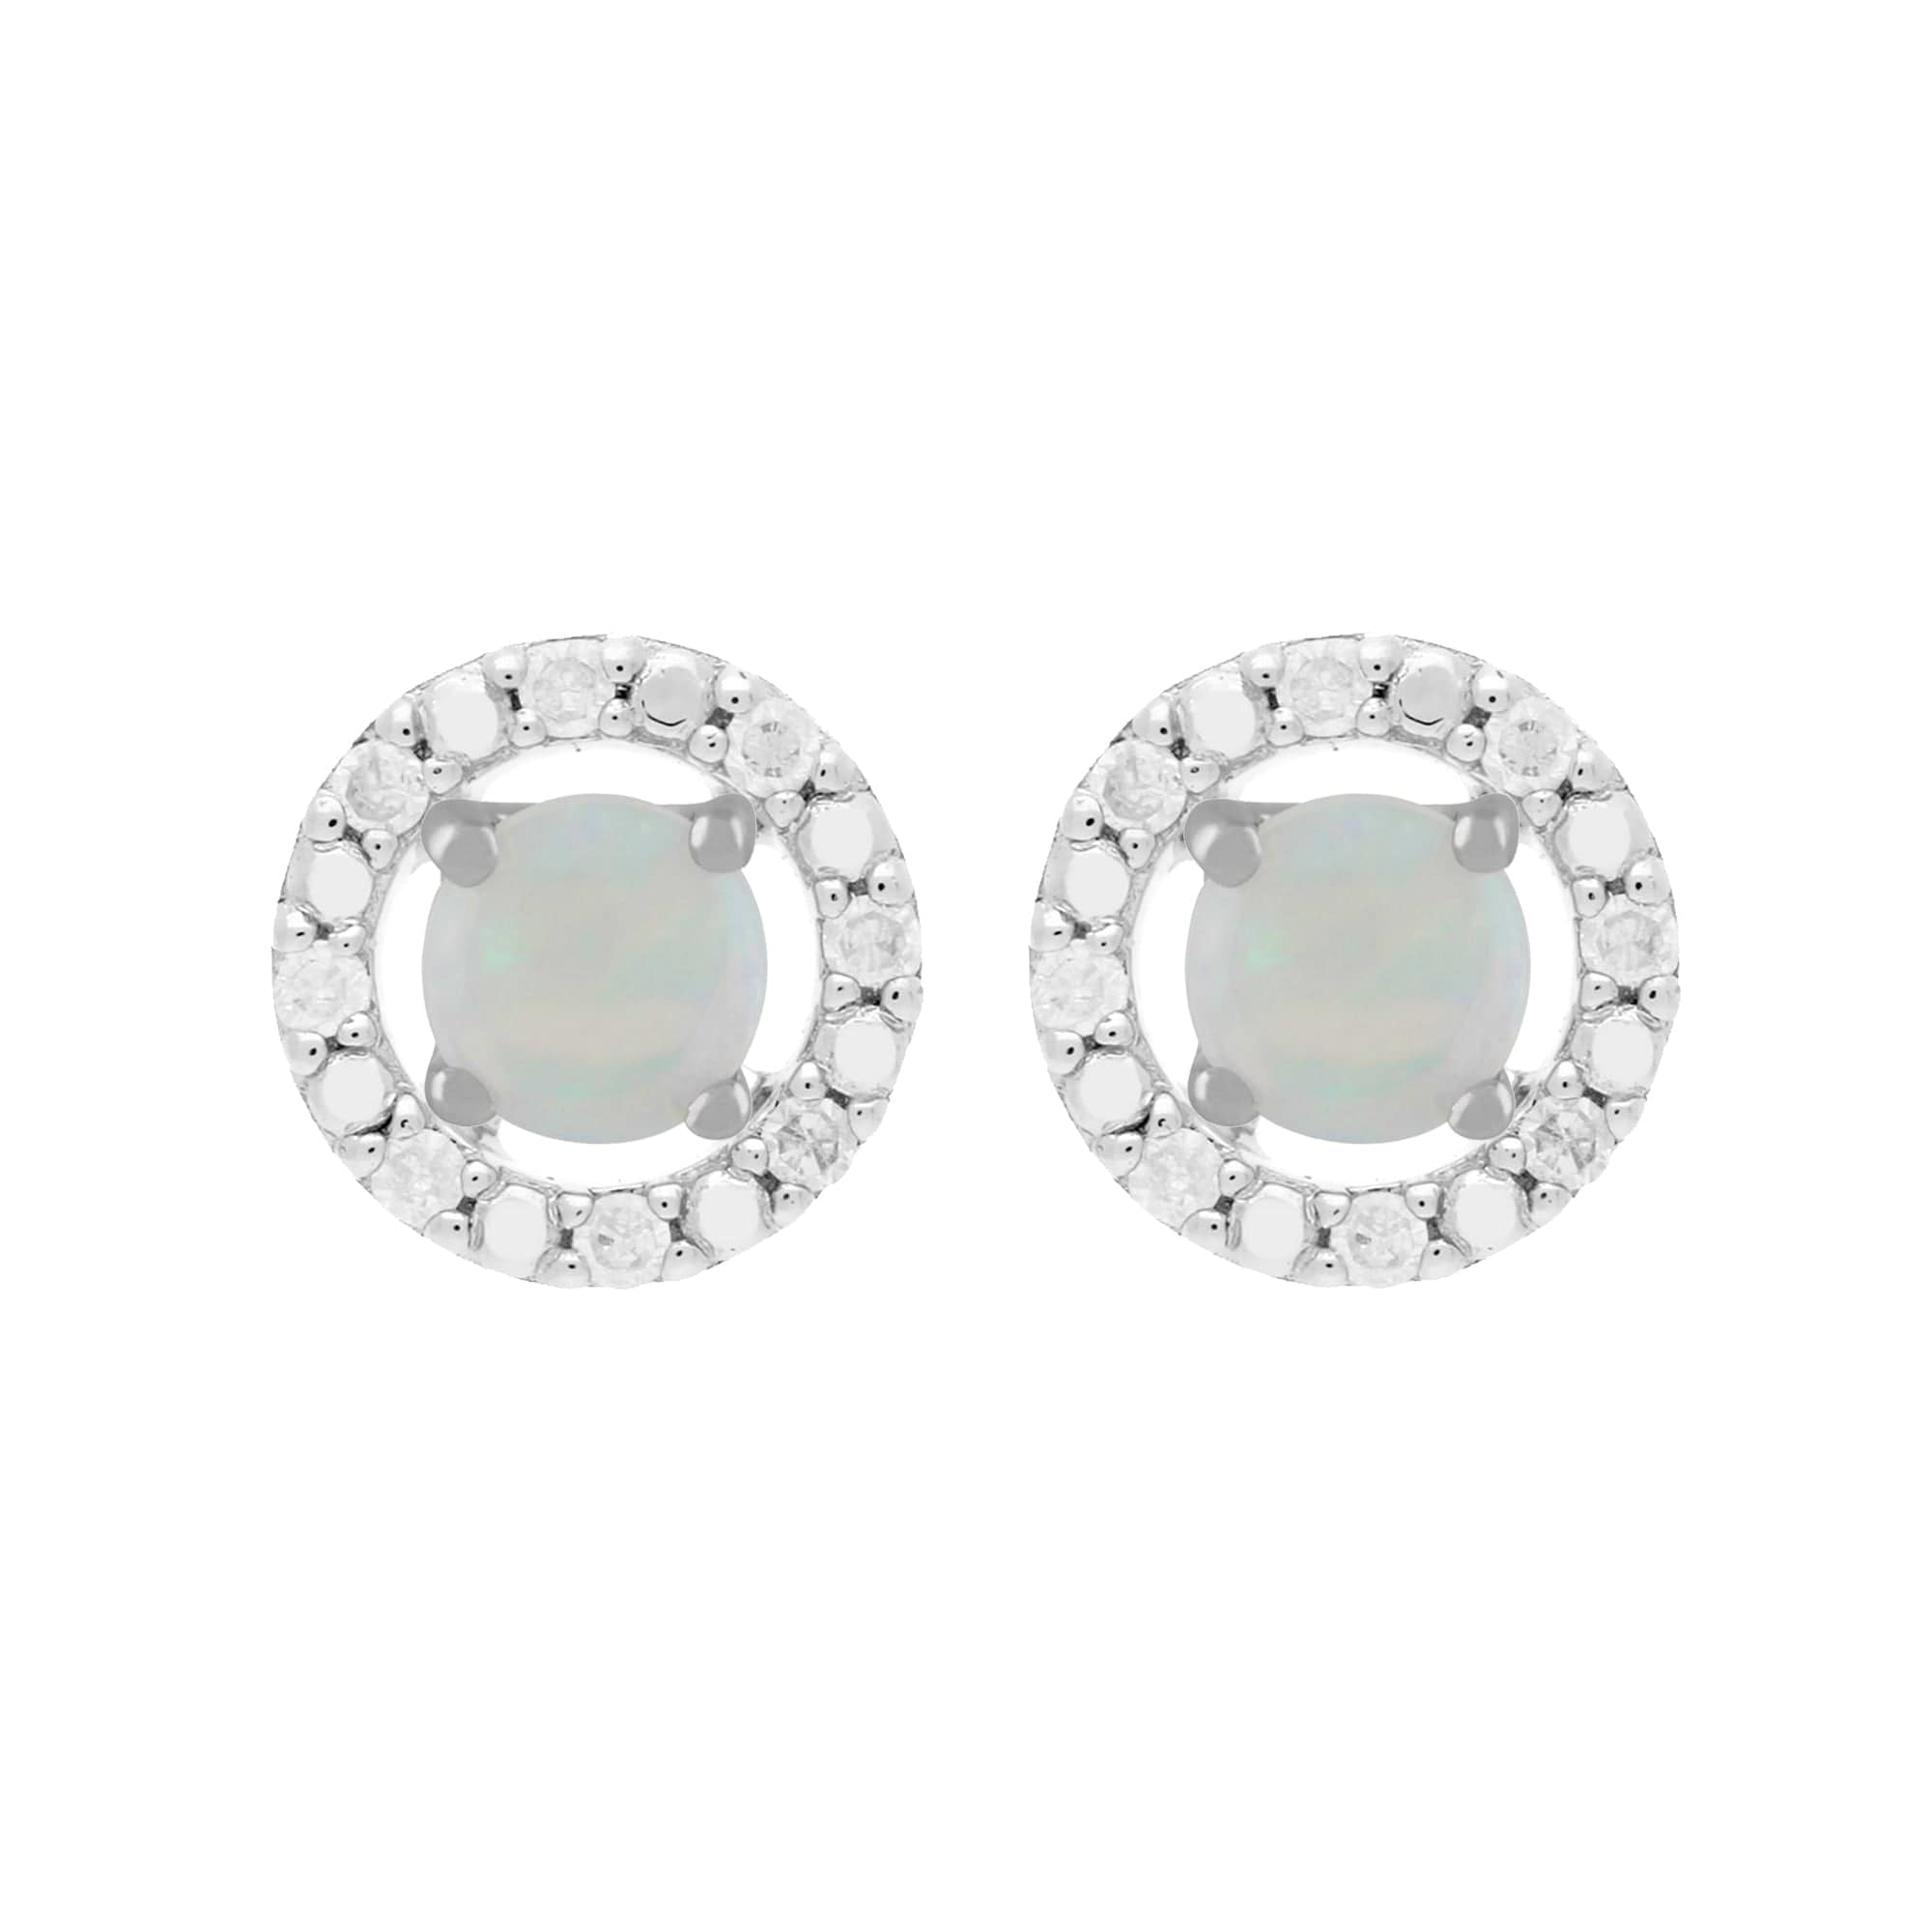 117E0031149-162E0228019 Classic Round Opal Stud Earrings and Detachable Diamond Round Ear Jacket in 9ct White Gold 1